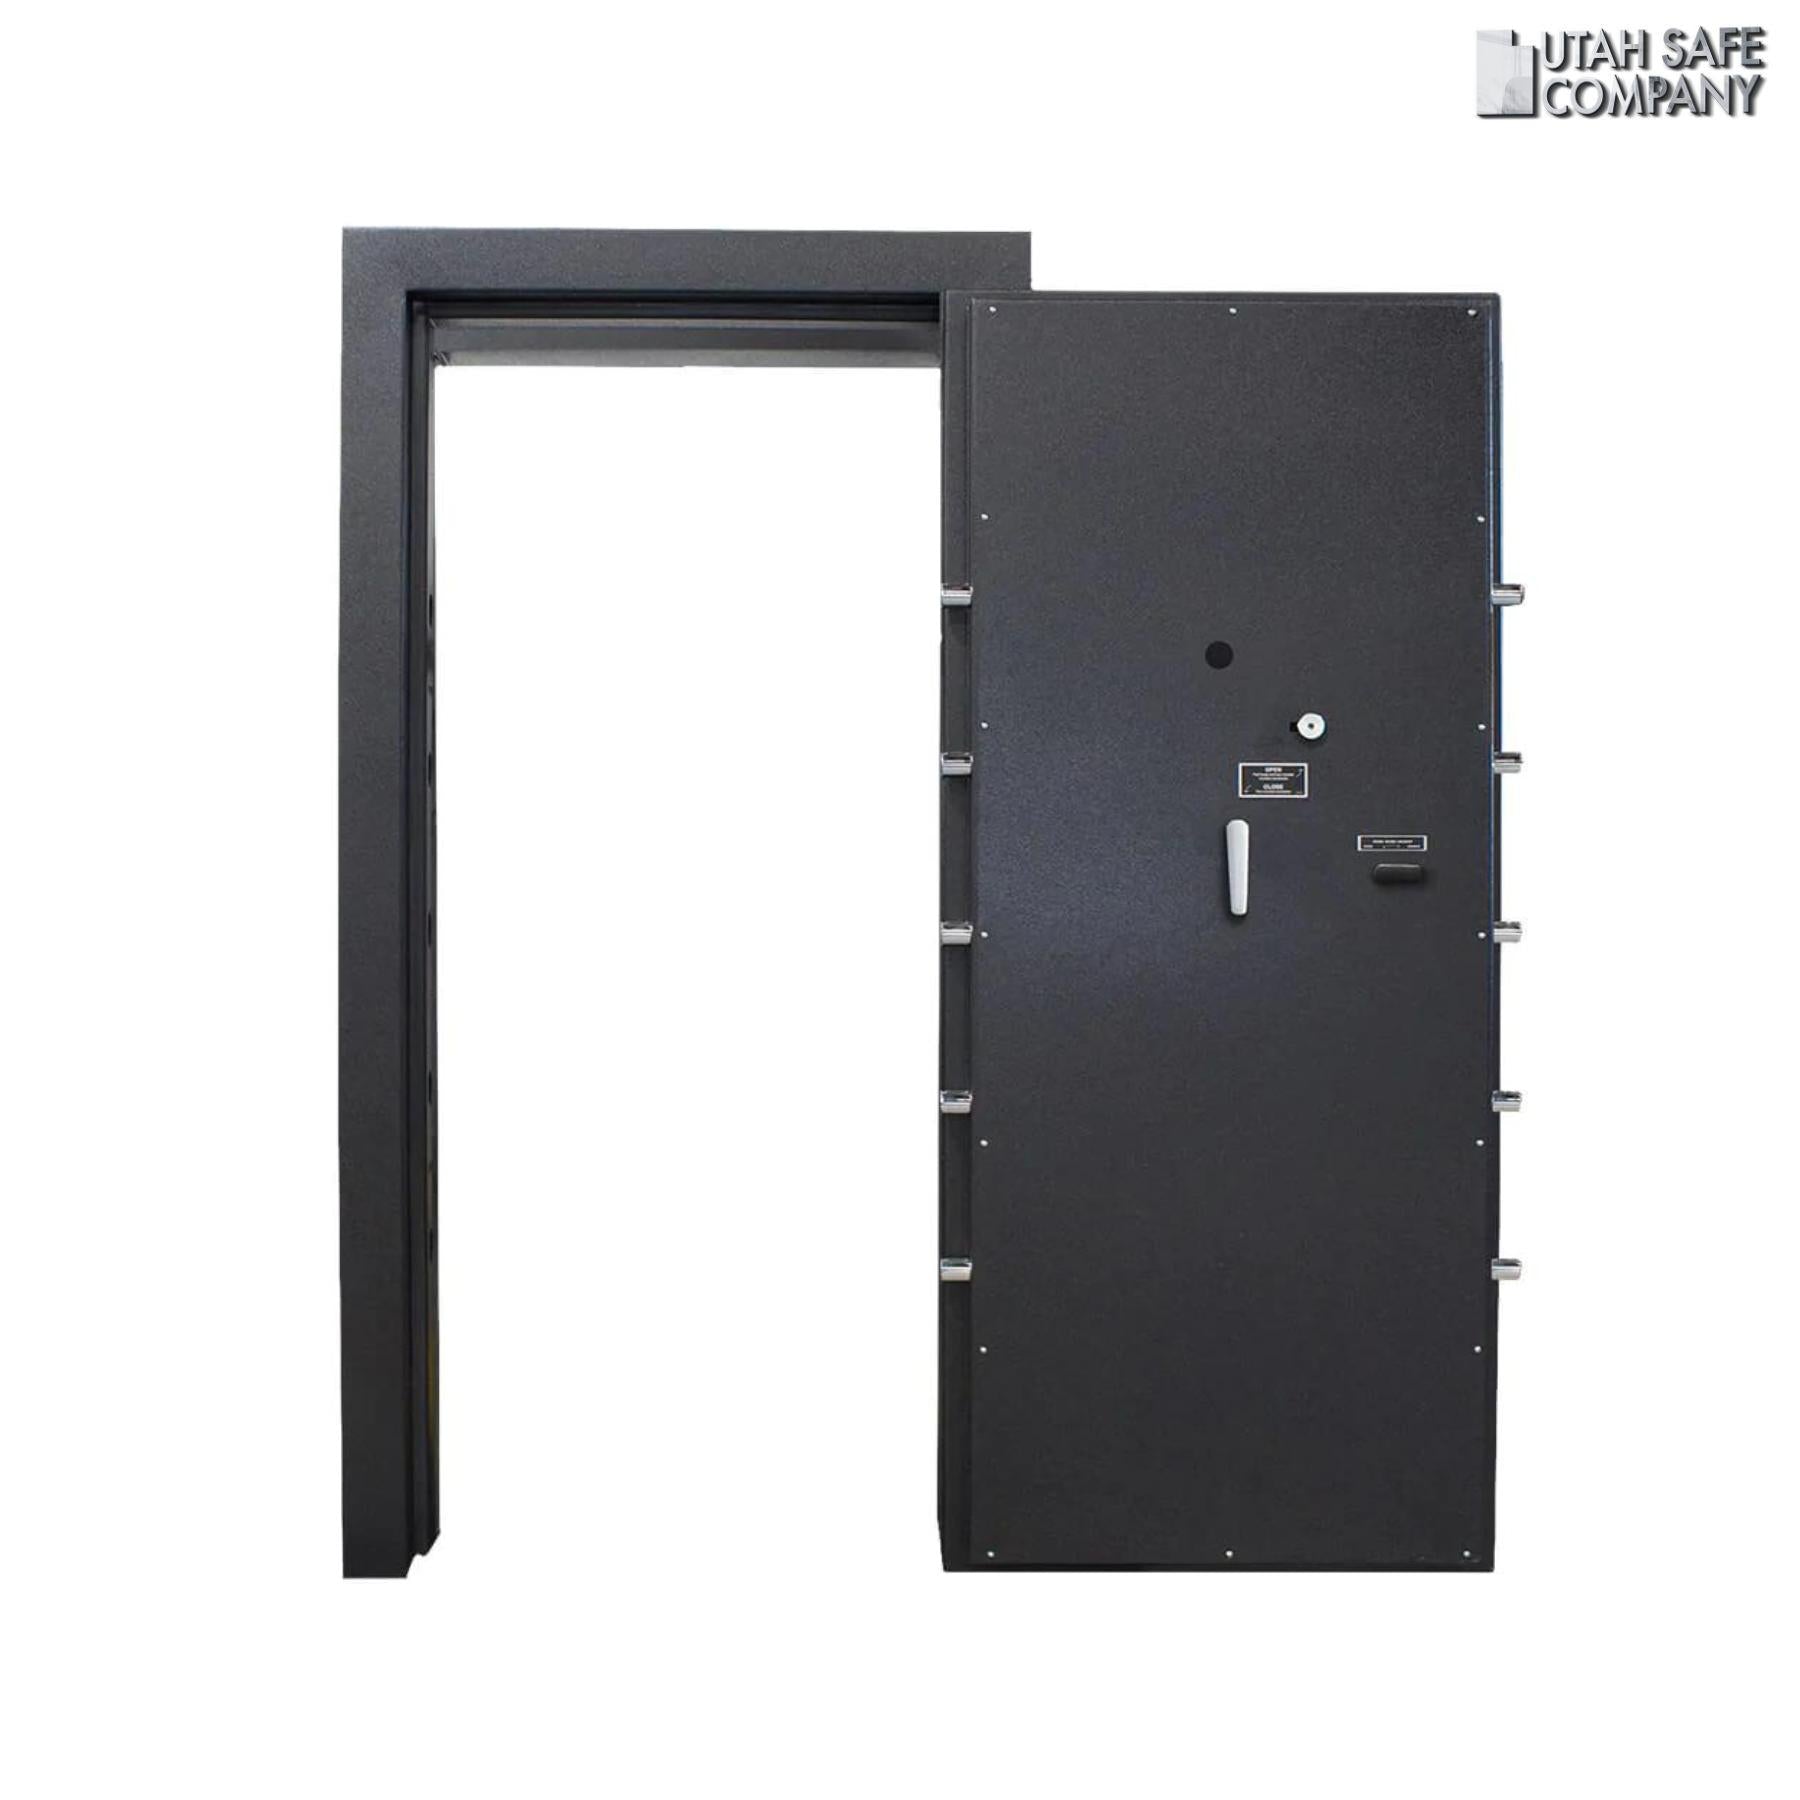 American Security VD8036BF Out-Swing Vault Door - Utah Safe Company